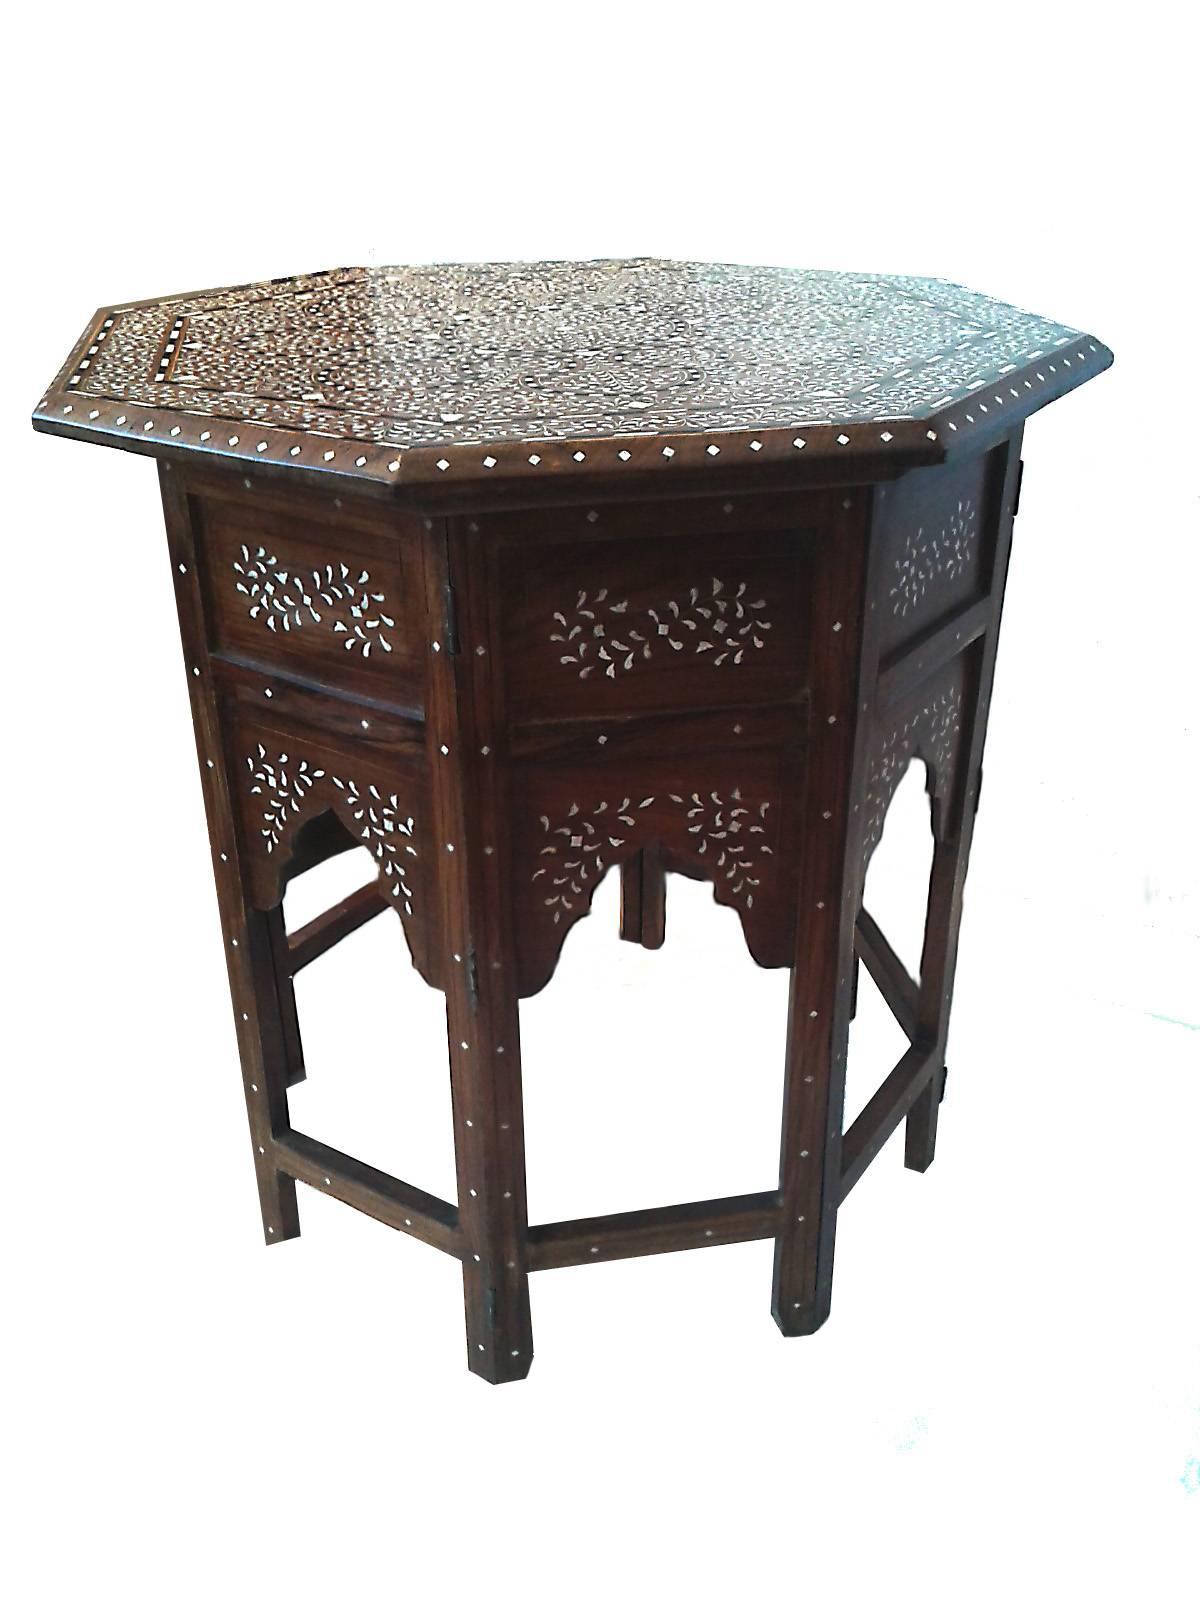 An octagonal side or end table with bone inlays, from India. Detachable folding base. Classic inlay pattern.